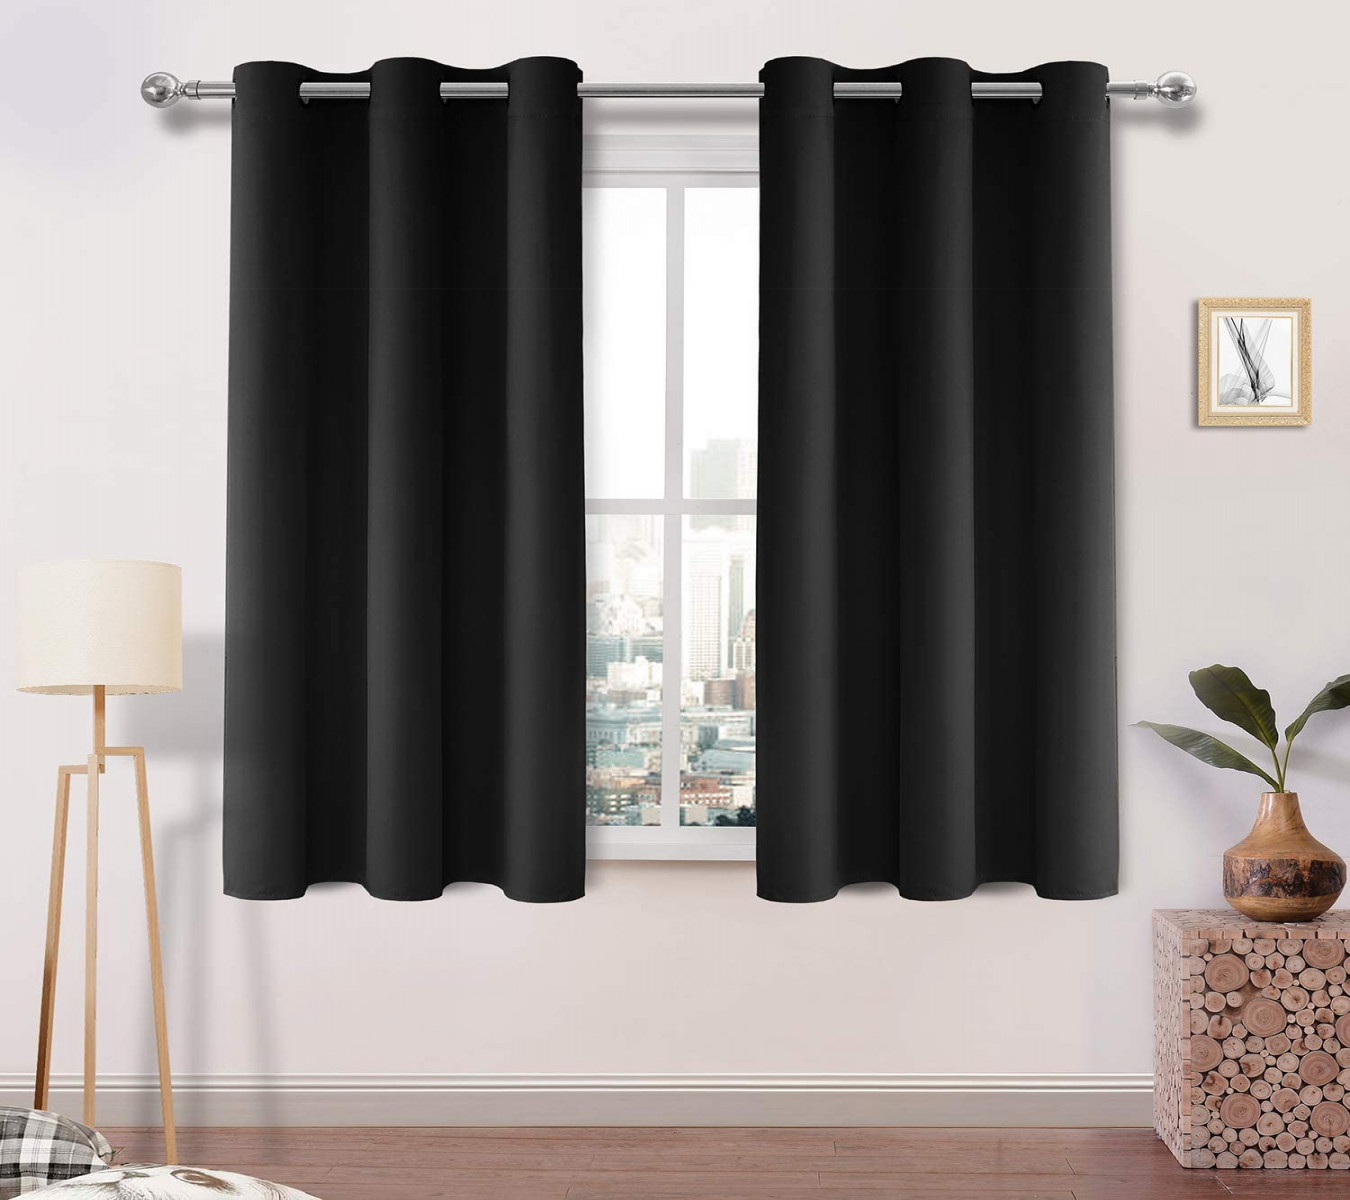 DWCN Blackout Curtains Room Darkening Thermal Insulated Grommet Window  Curtain for Bedroom Living Room  x  Inch  Panels Black Thick Curtain